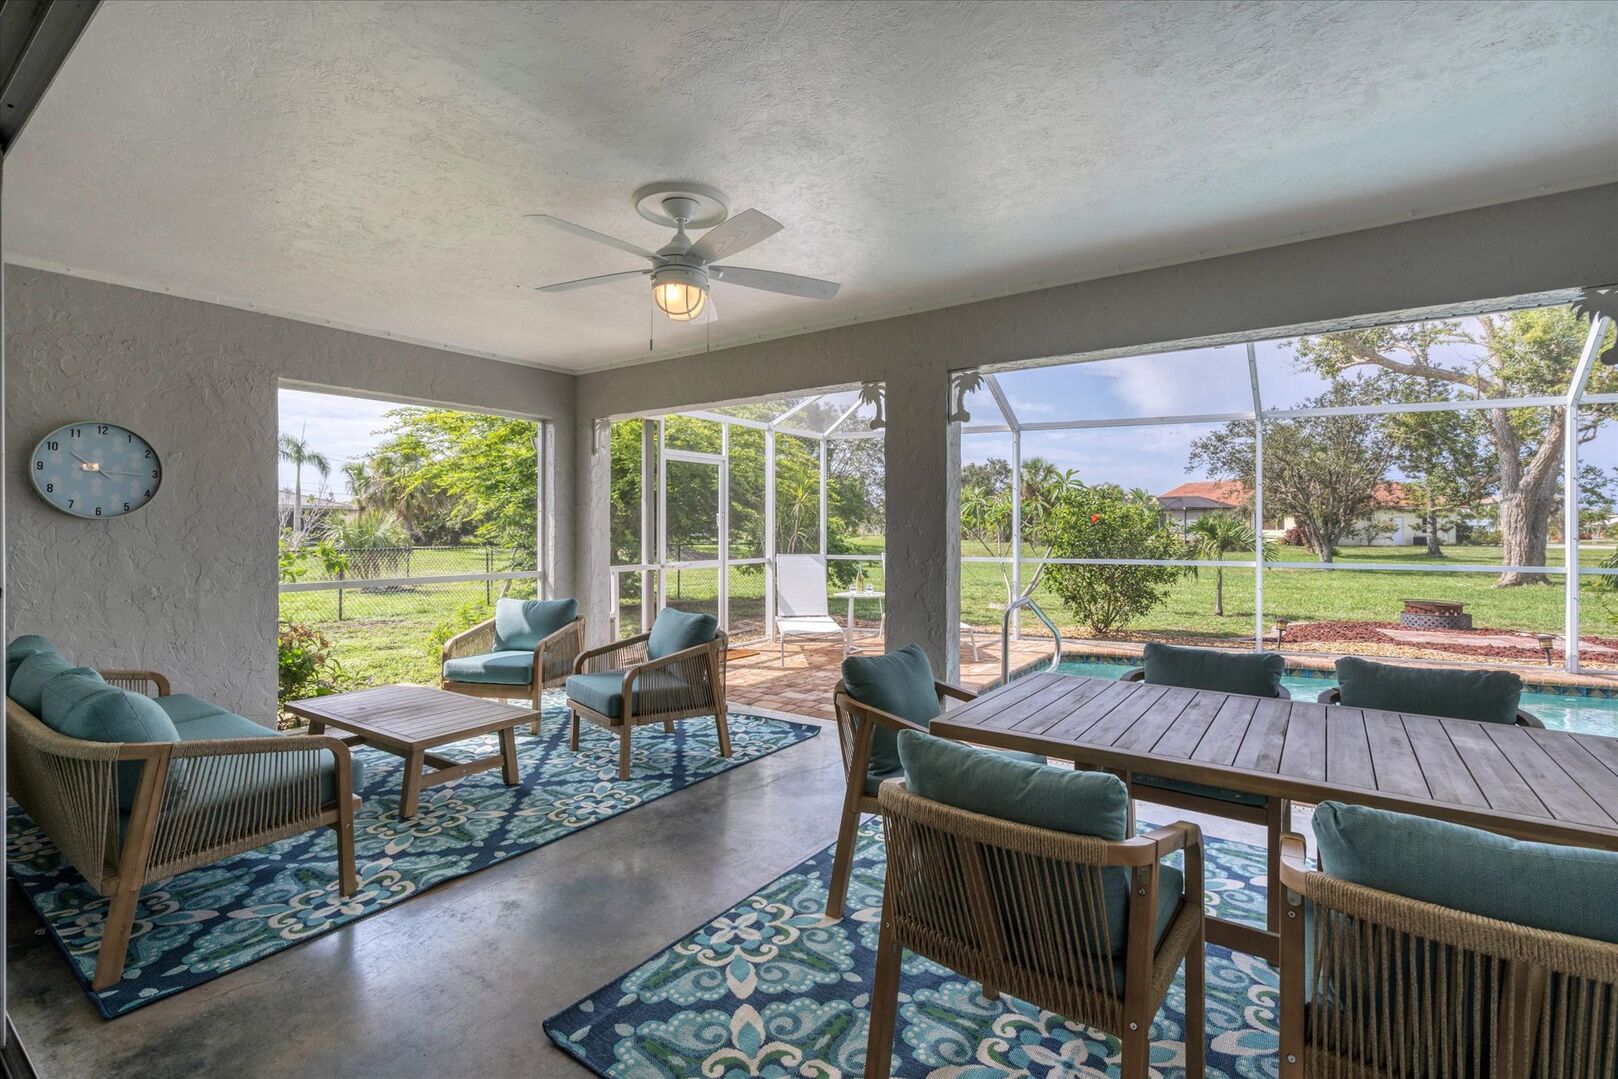 Spacious lanai with covered seating areas and pool